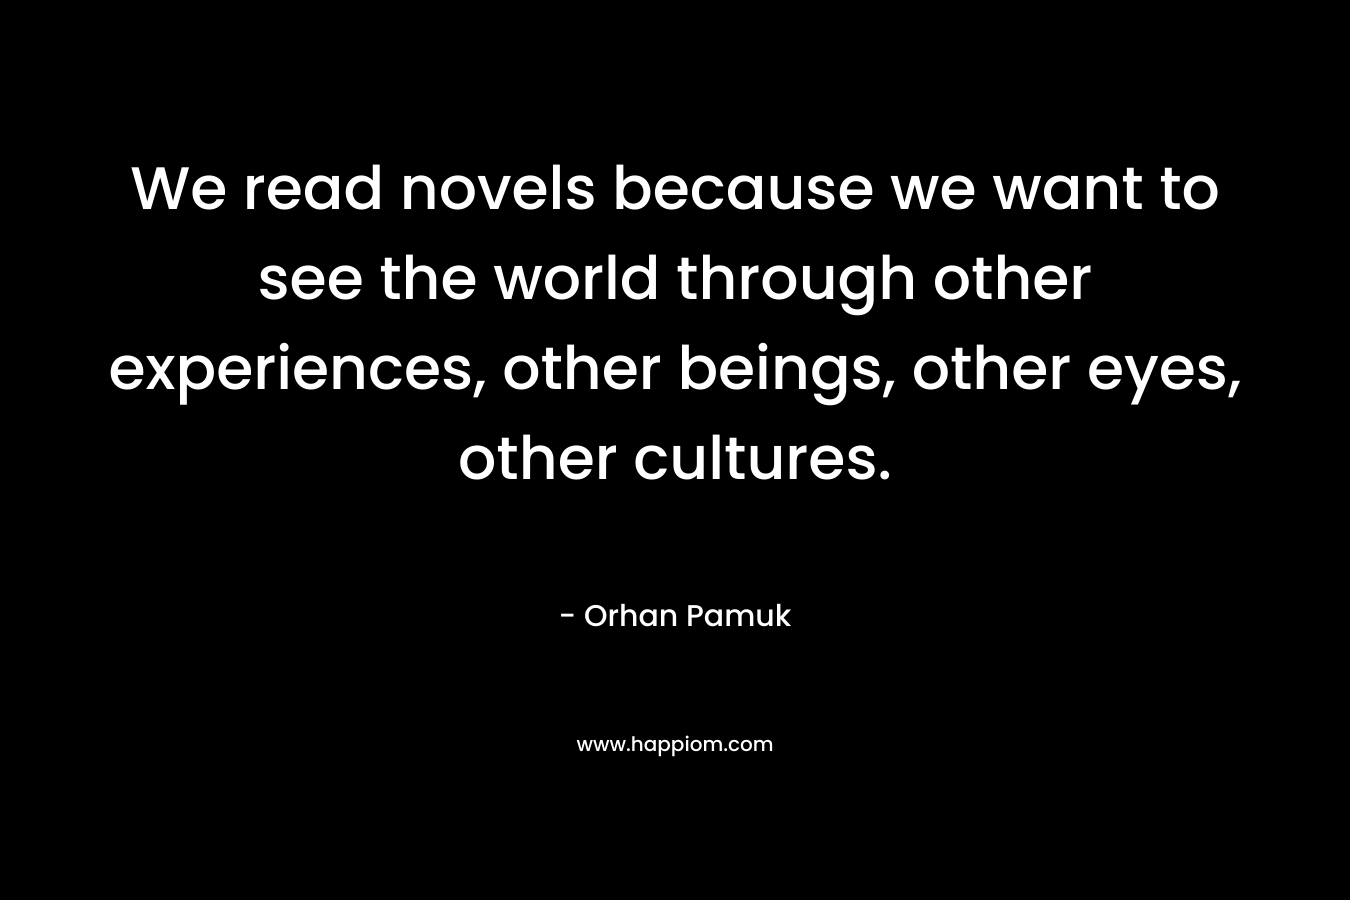 We read novels because we want to see the world through other experiences, other beings, other eyes, other cultures. – Orhan Pamuk